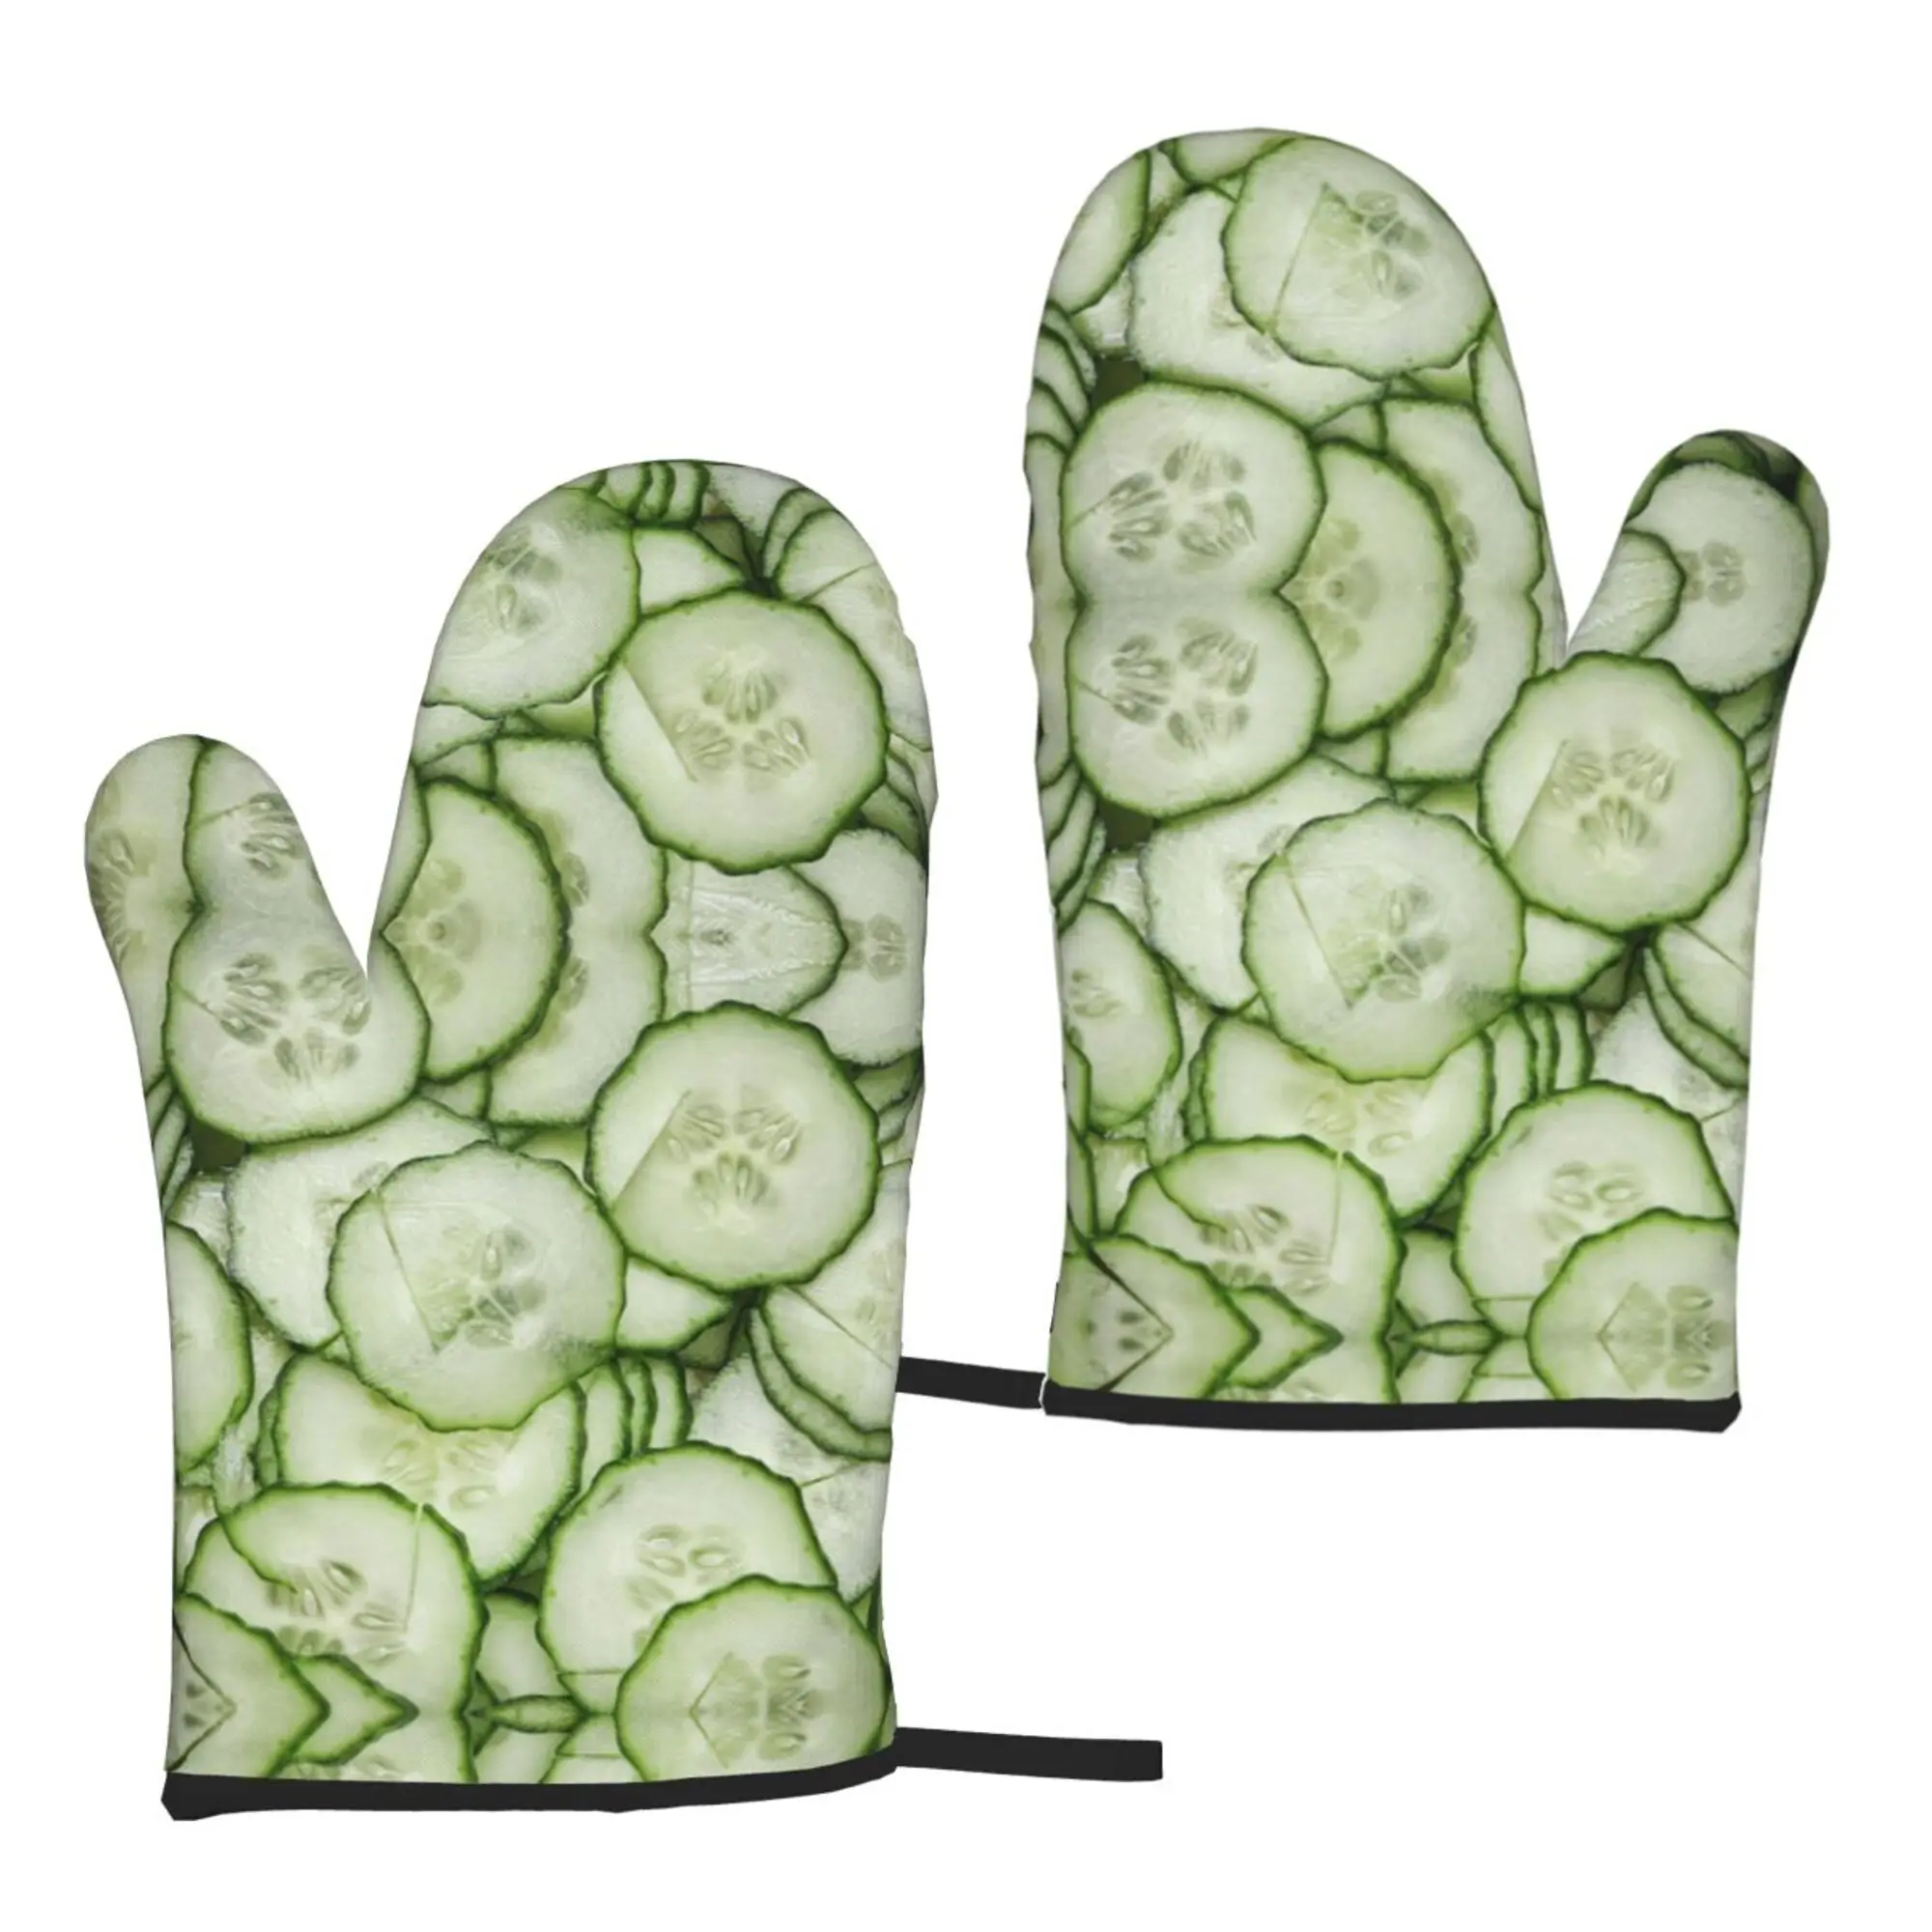 

Funny Real Cucumber Oven Mitts 2pc Heat Resistant Gloves Kitchen Decor Heat Resistant Pot Holders Set for Cooking Baking